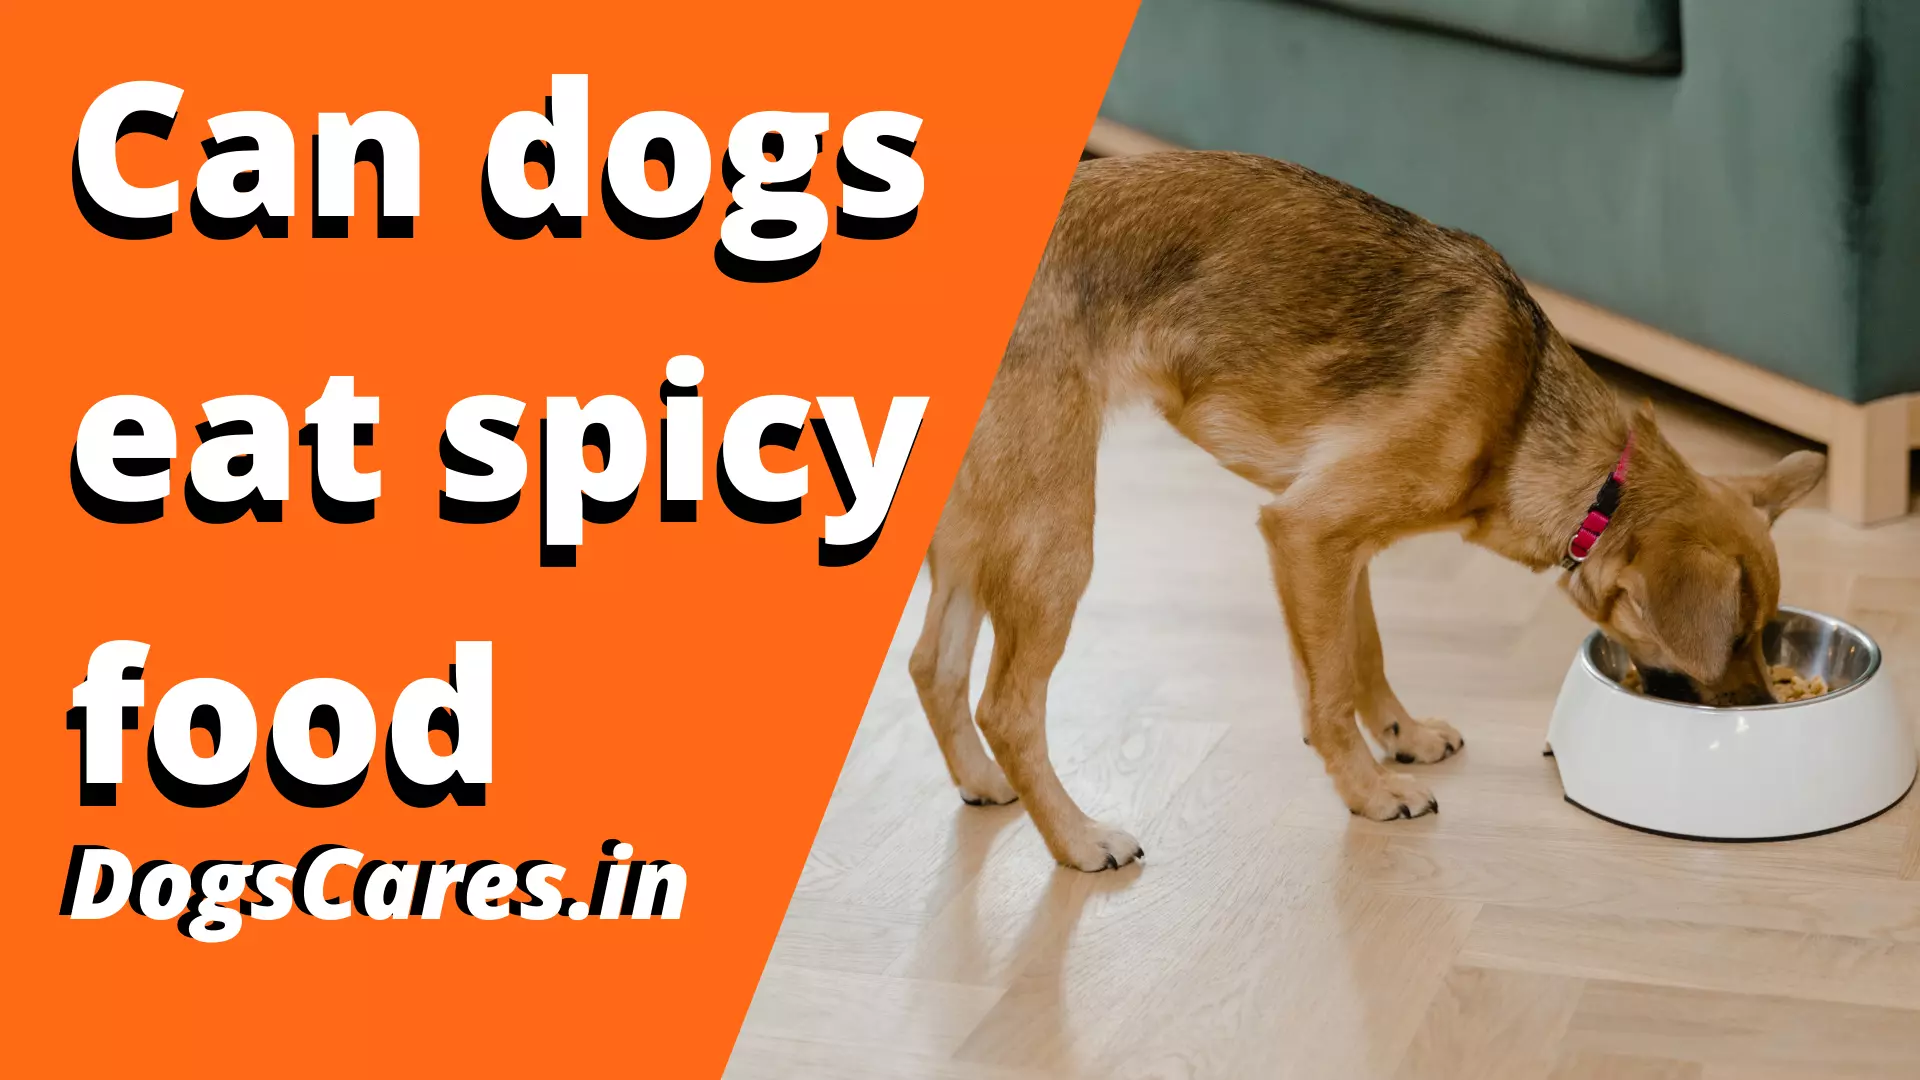 Can dogs eat spicy food